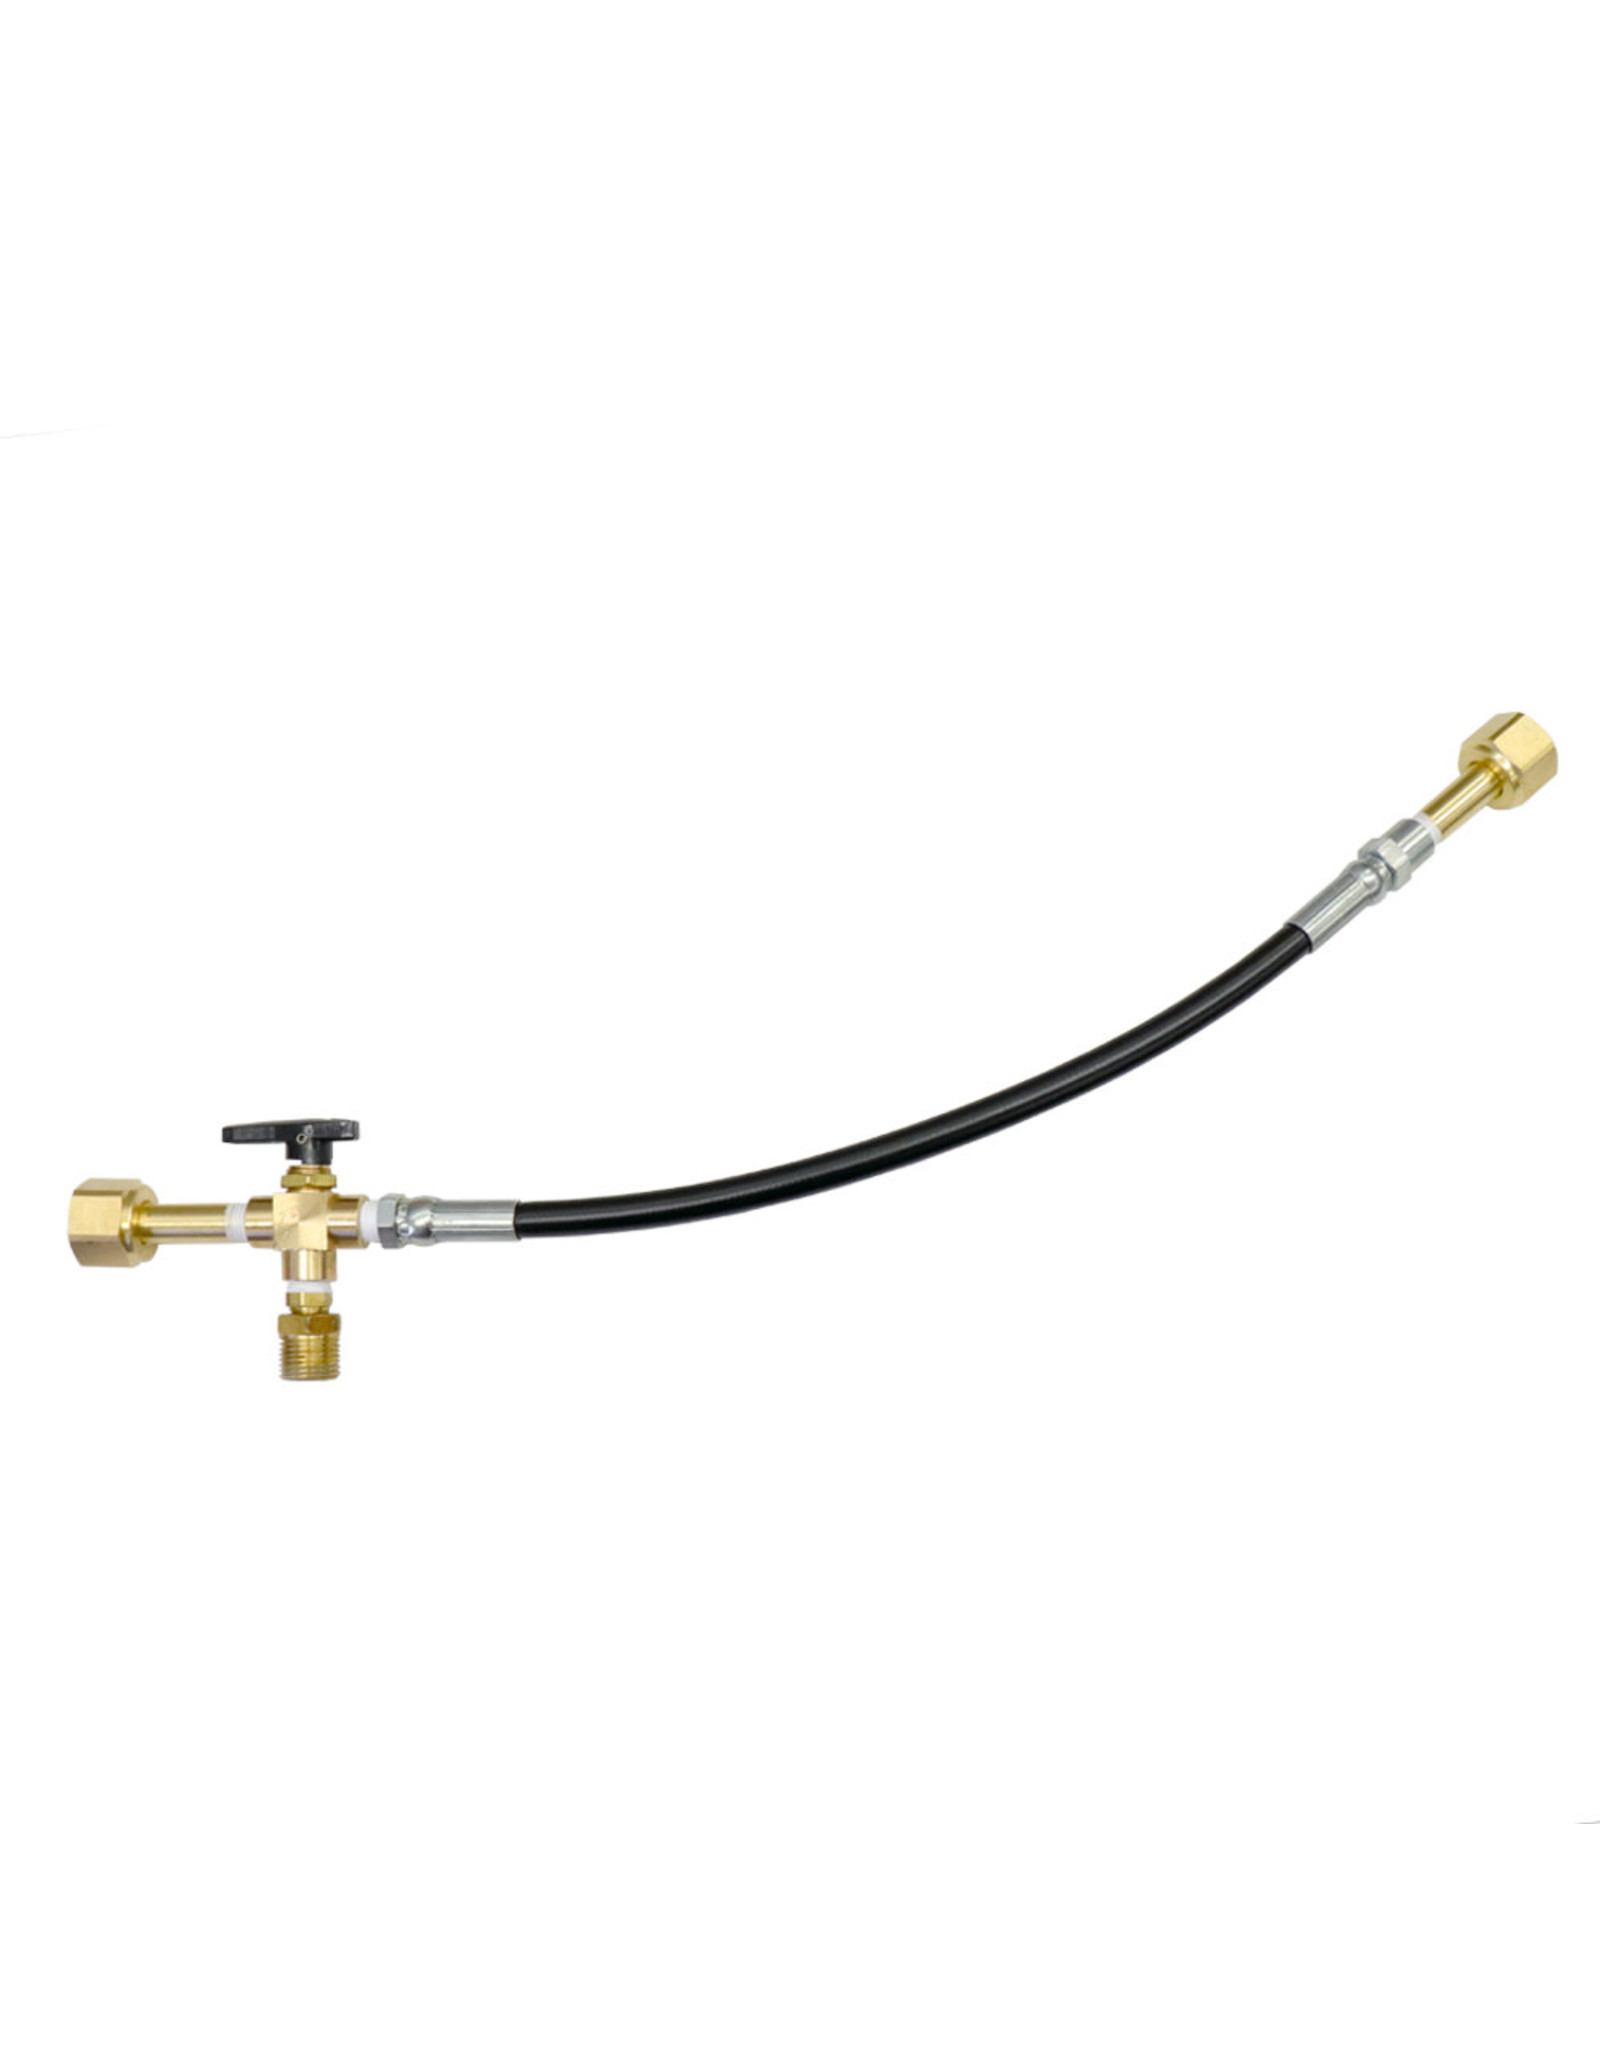 CO2 manual changeover hose